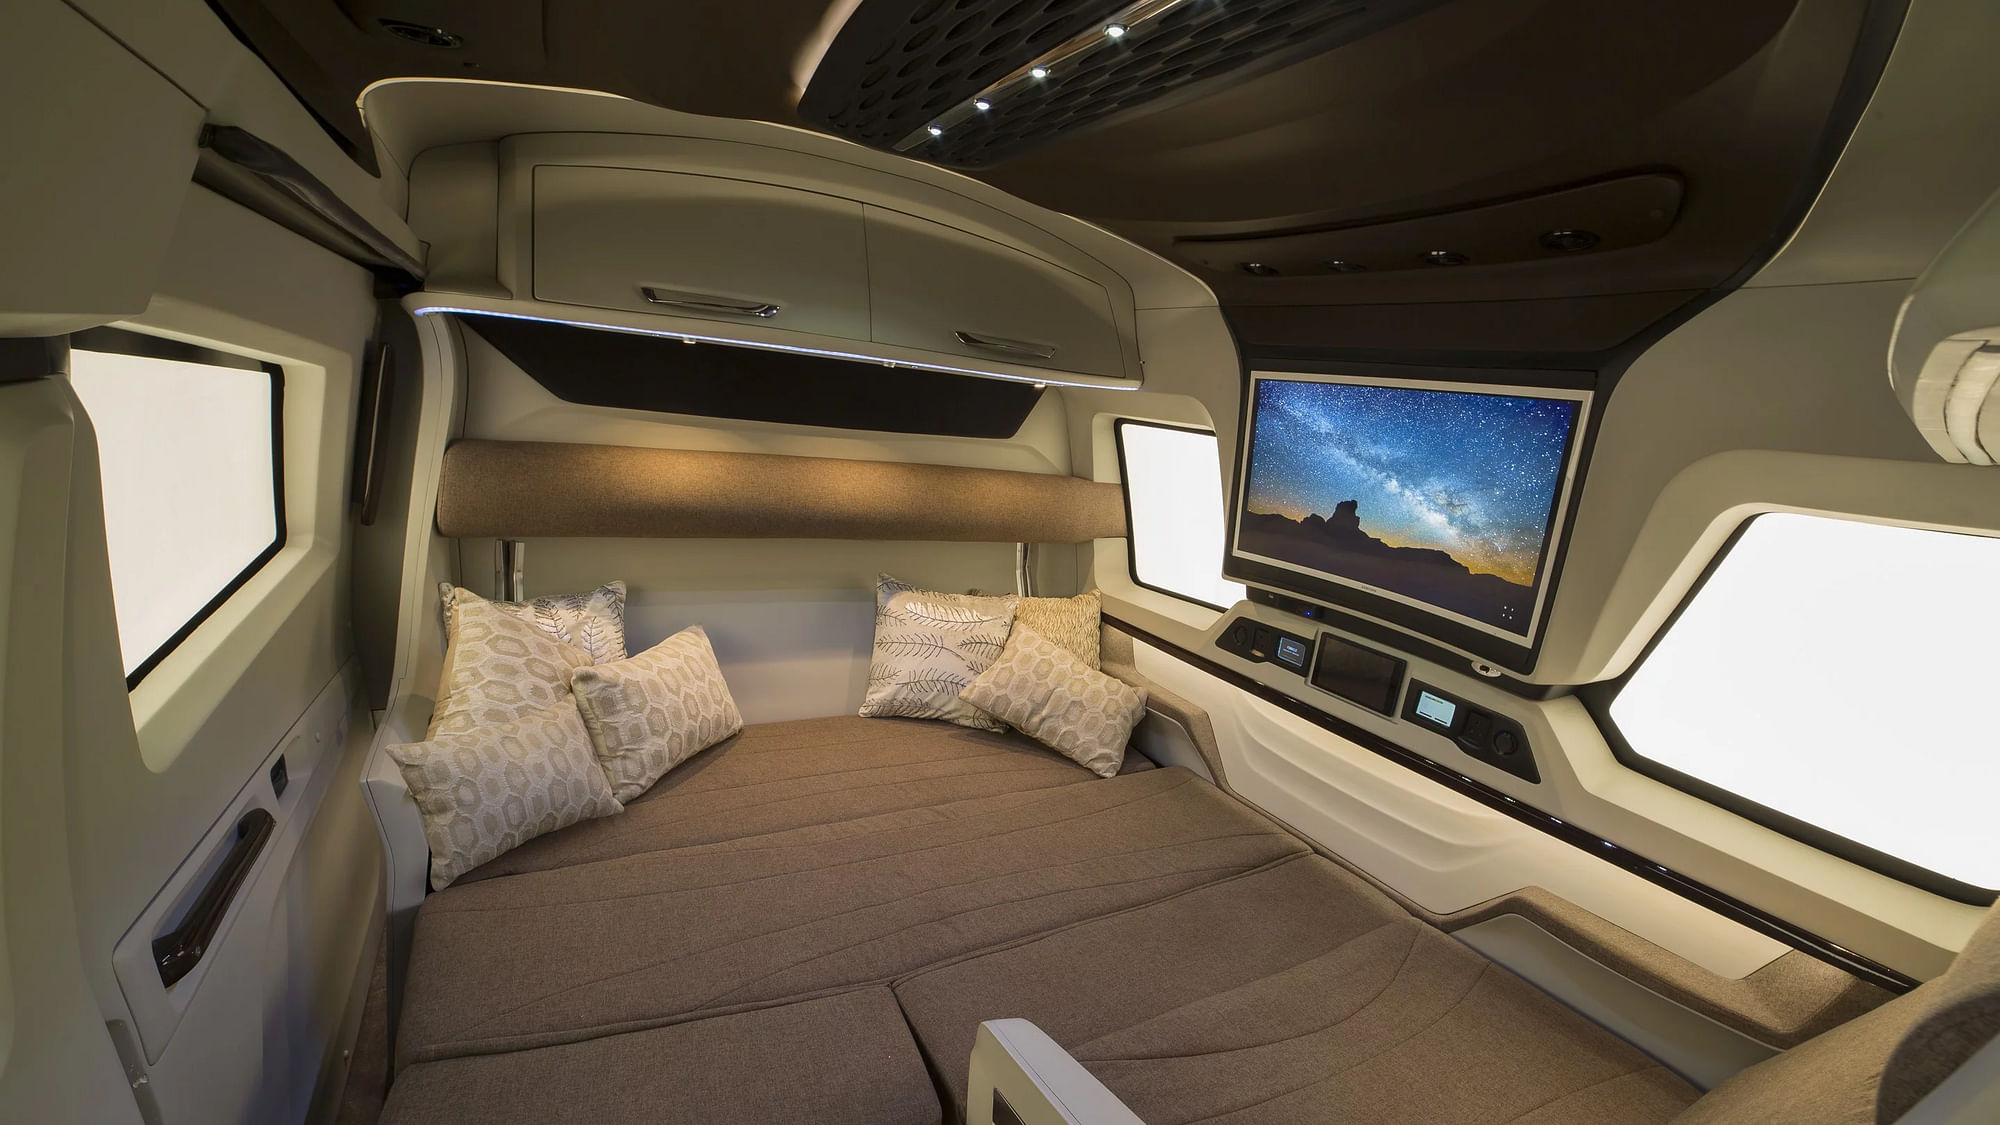 The inside of Pinnacle Specialty Vehicles’ luxury motor home.